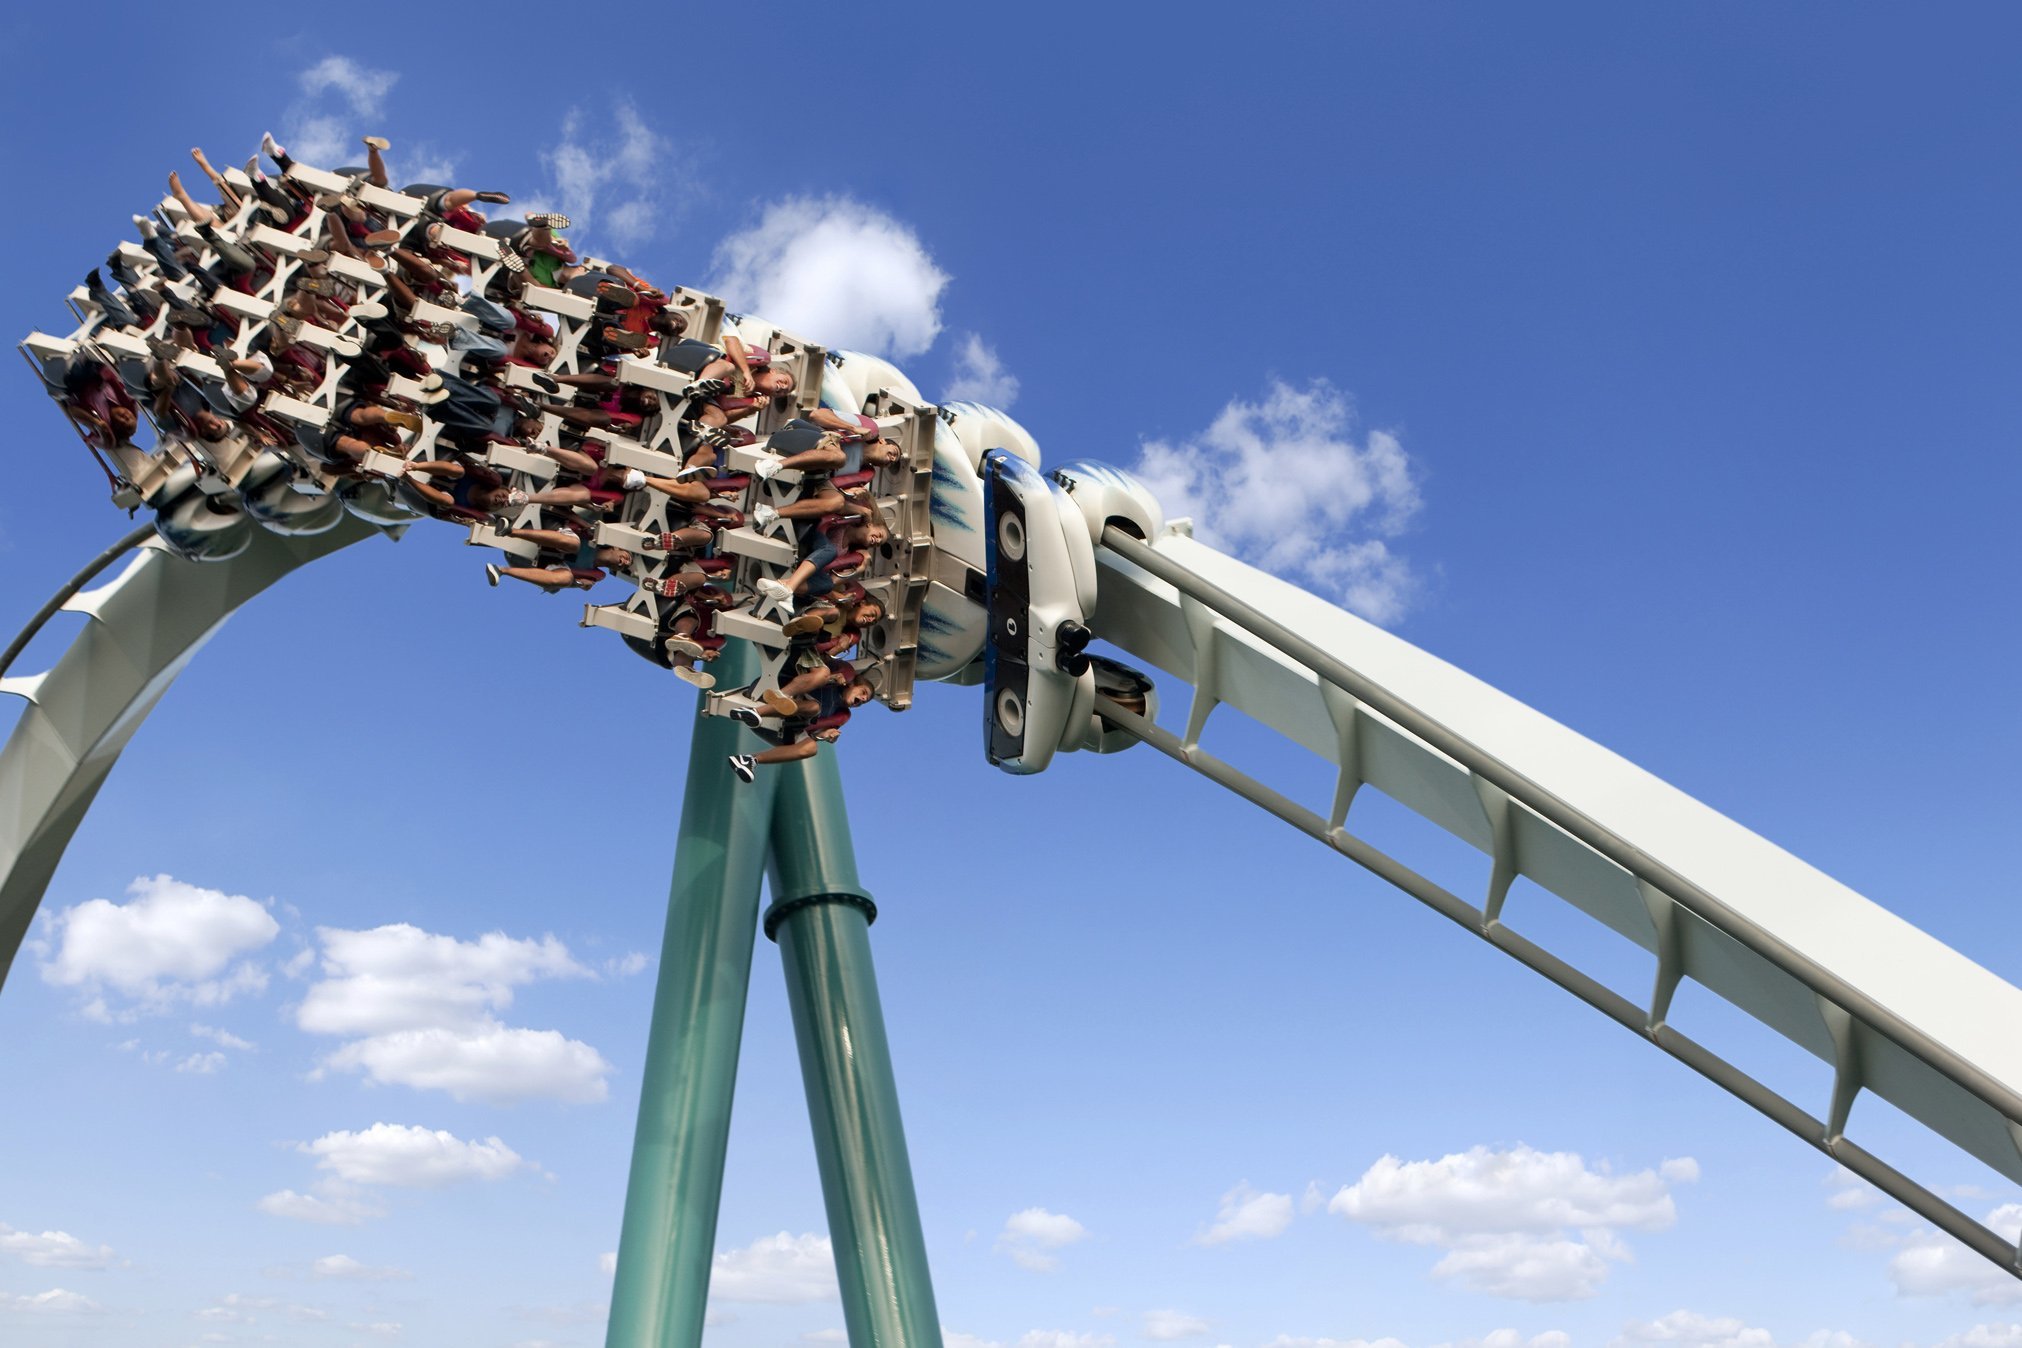 Teal and white upside down roller coaster